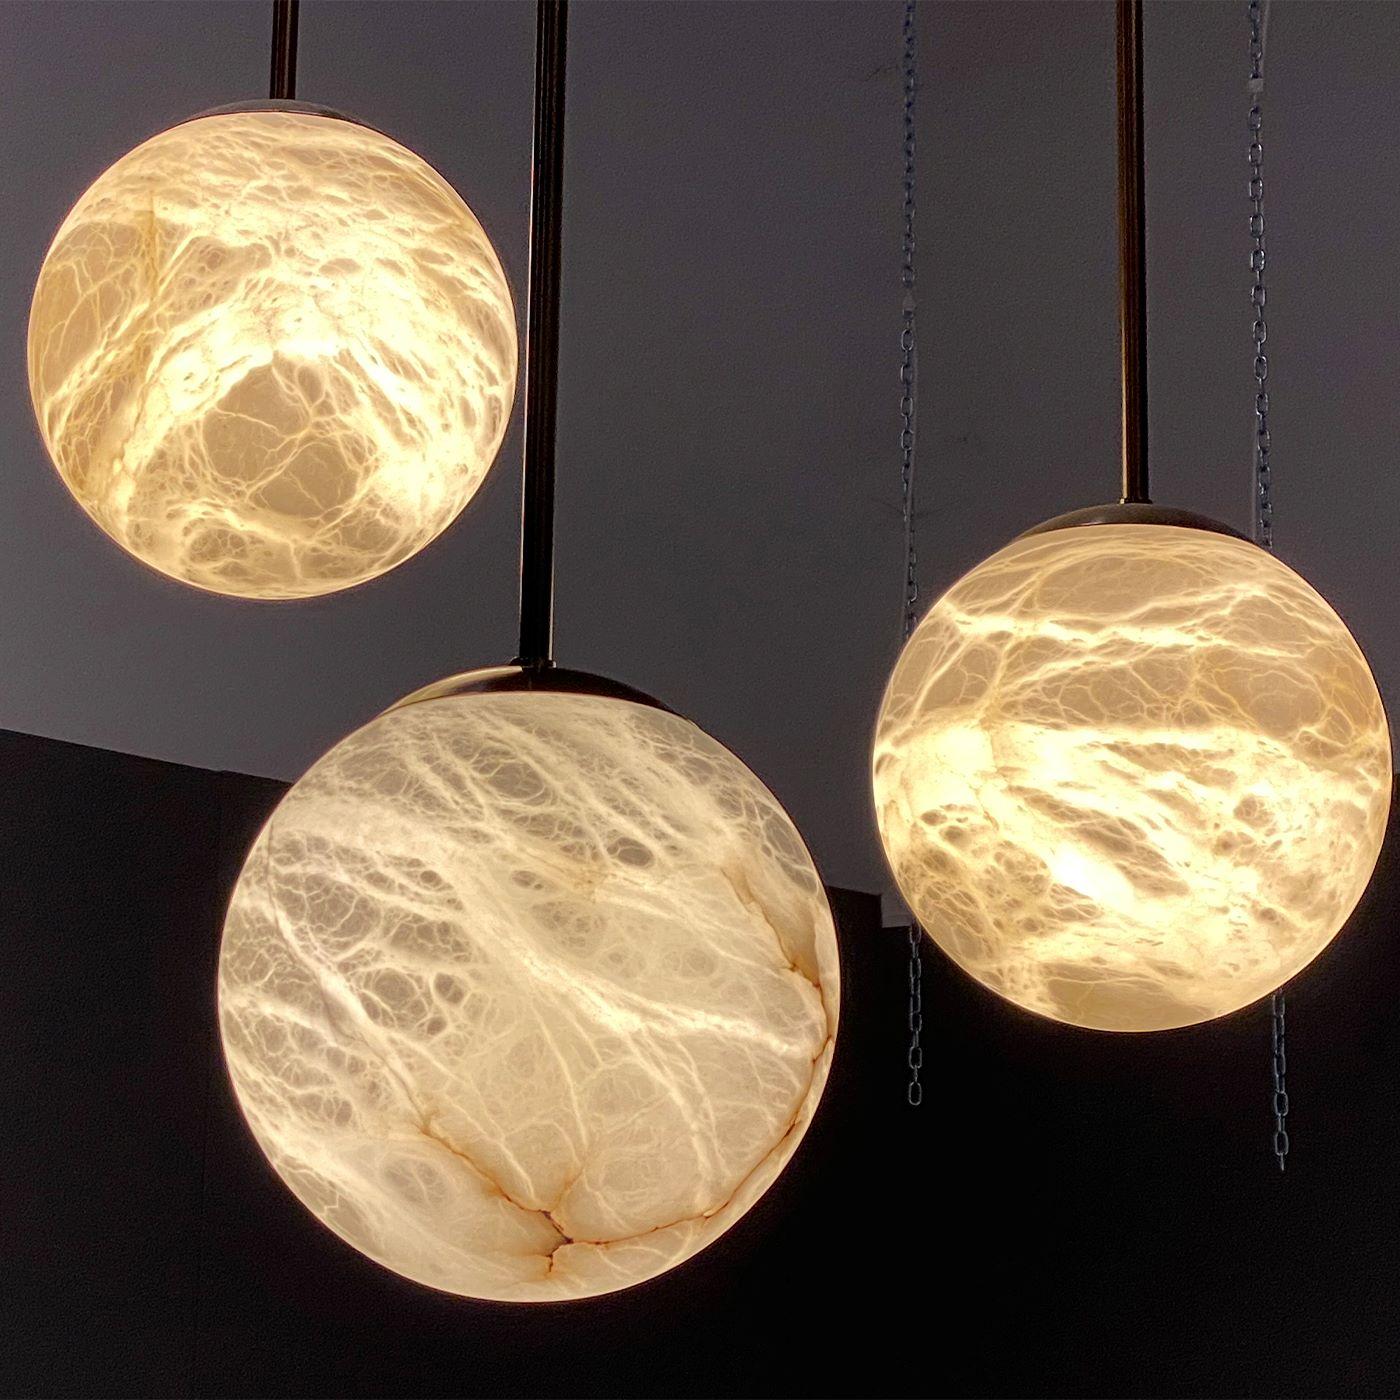 Maxi Alabaster Moon pendants, in a set of three, recall the magic of full moon nights. Large, illuminated globes that float in the air and emit a warm and diffused light. Alone or in a composition, these pendants reveal the vibrant richness of